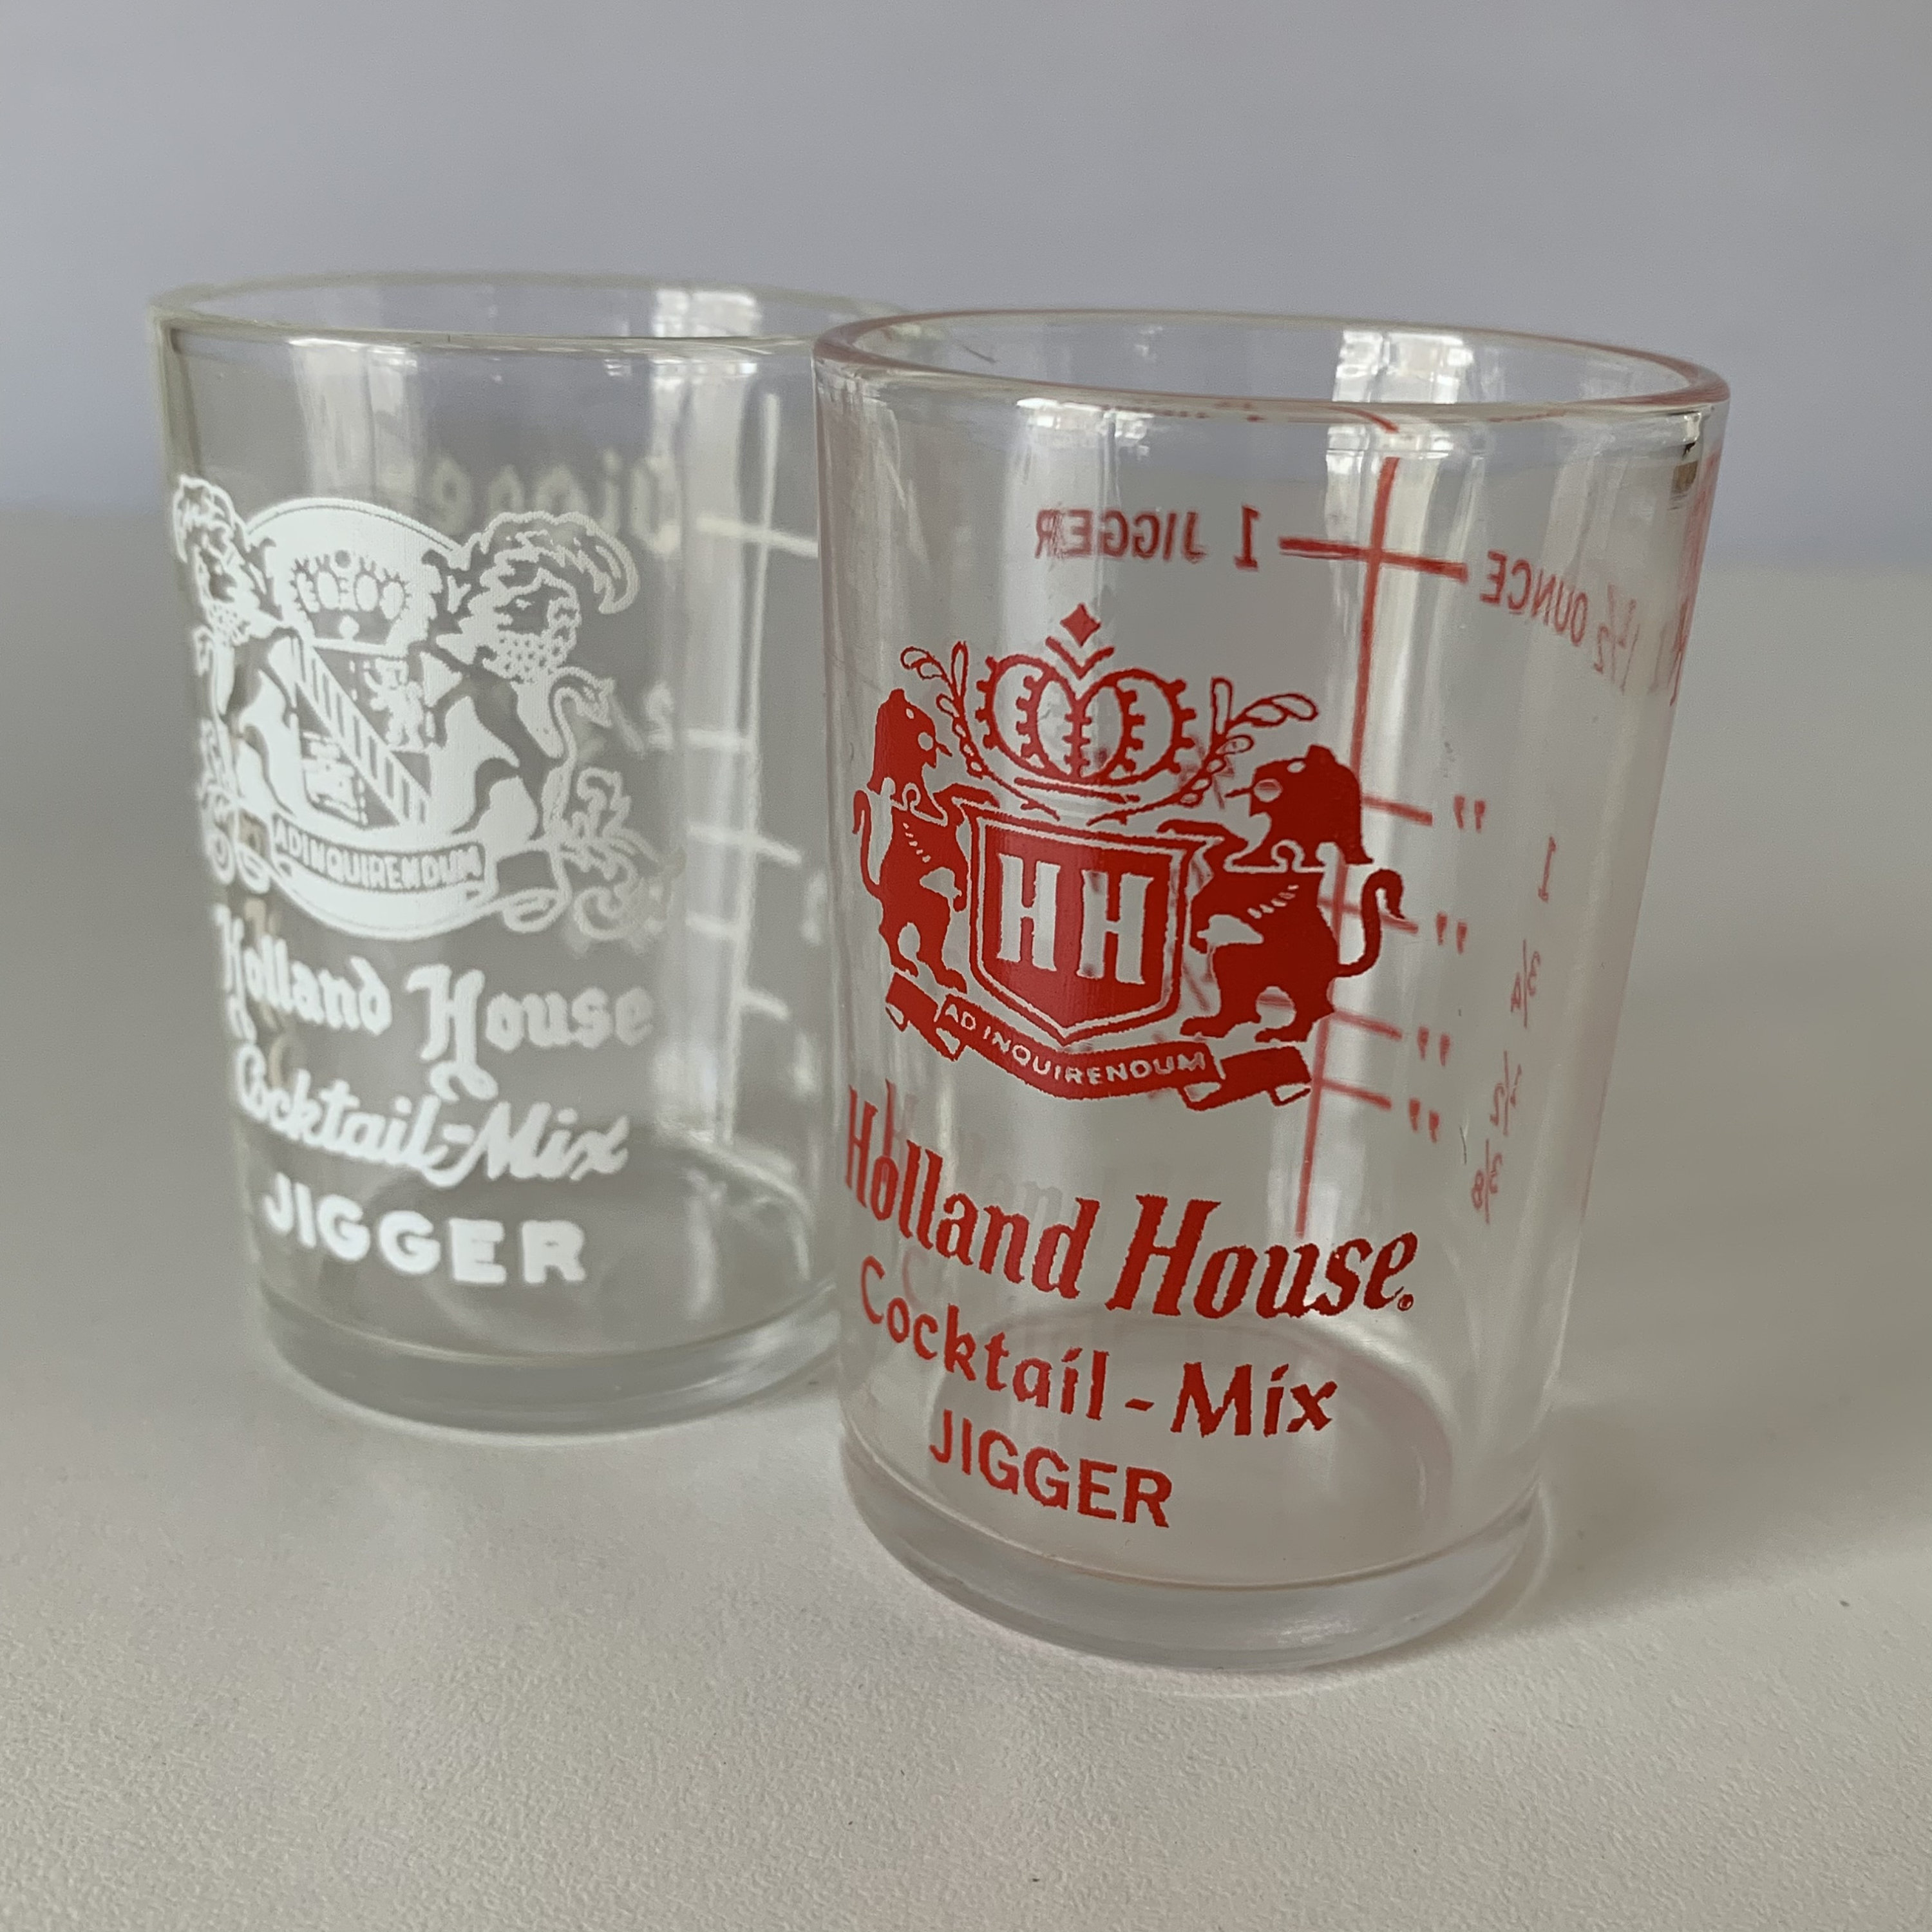 Glass Measuring Cup 1 1/2 Oz 1 Jigger Holland House Cocktail Mix